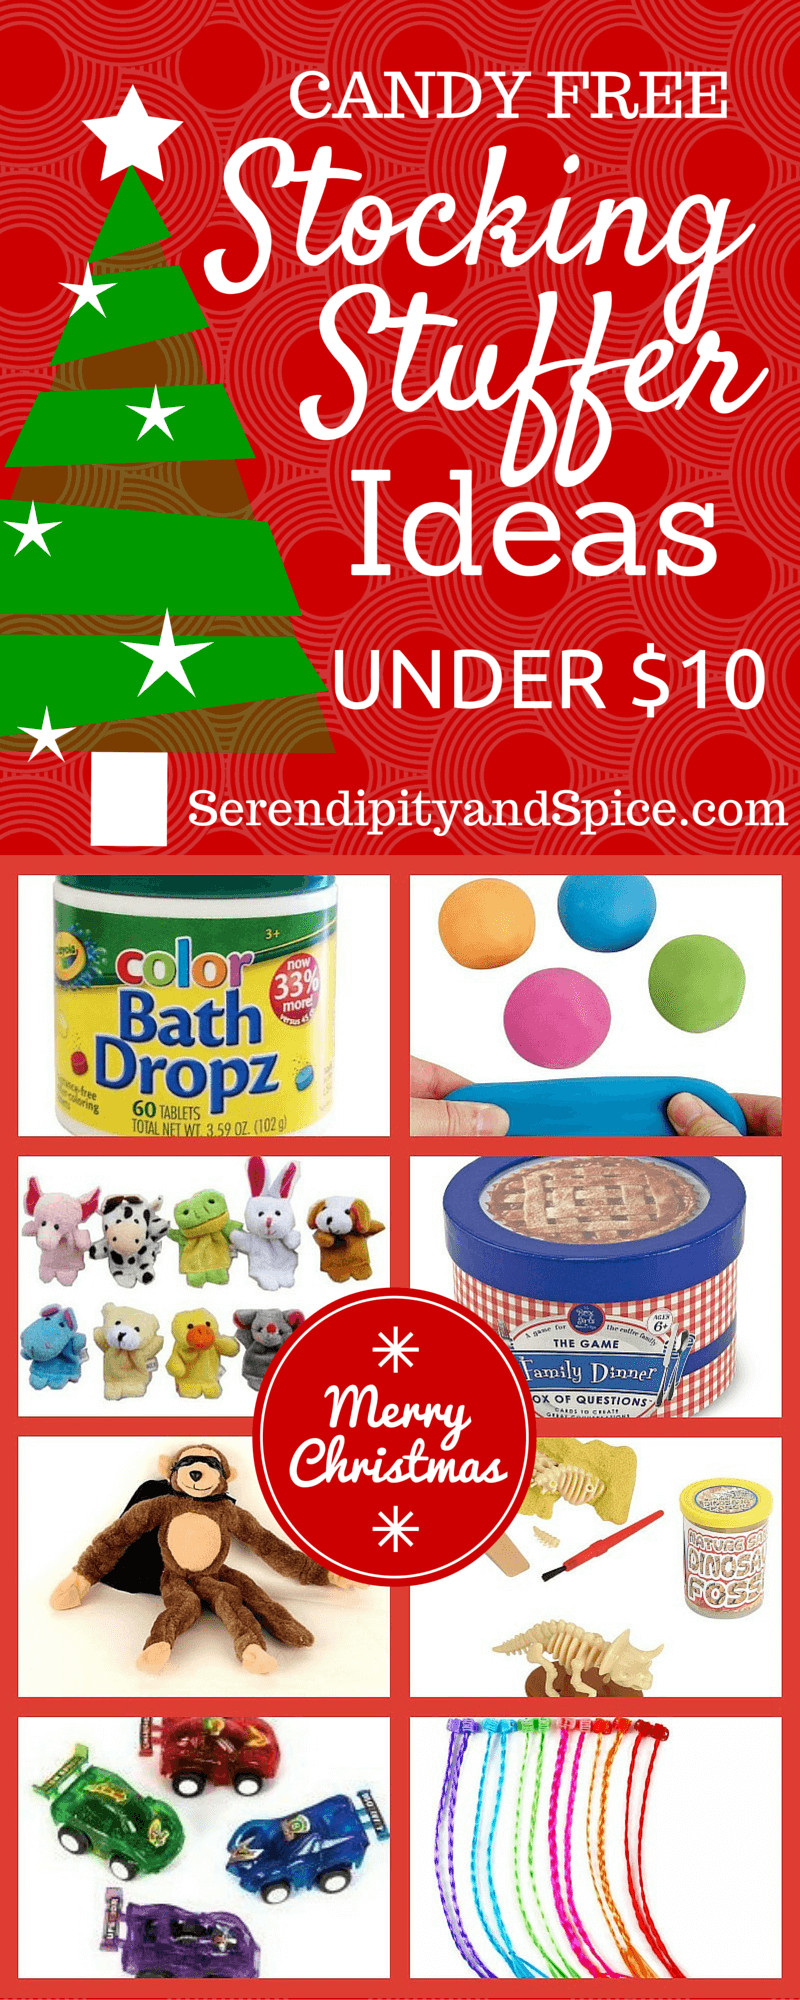 Christmas Candy Stocking Stuffers
 Stocking Stuffer Ideas Other Than Candy Serendipity and